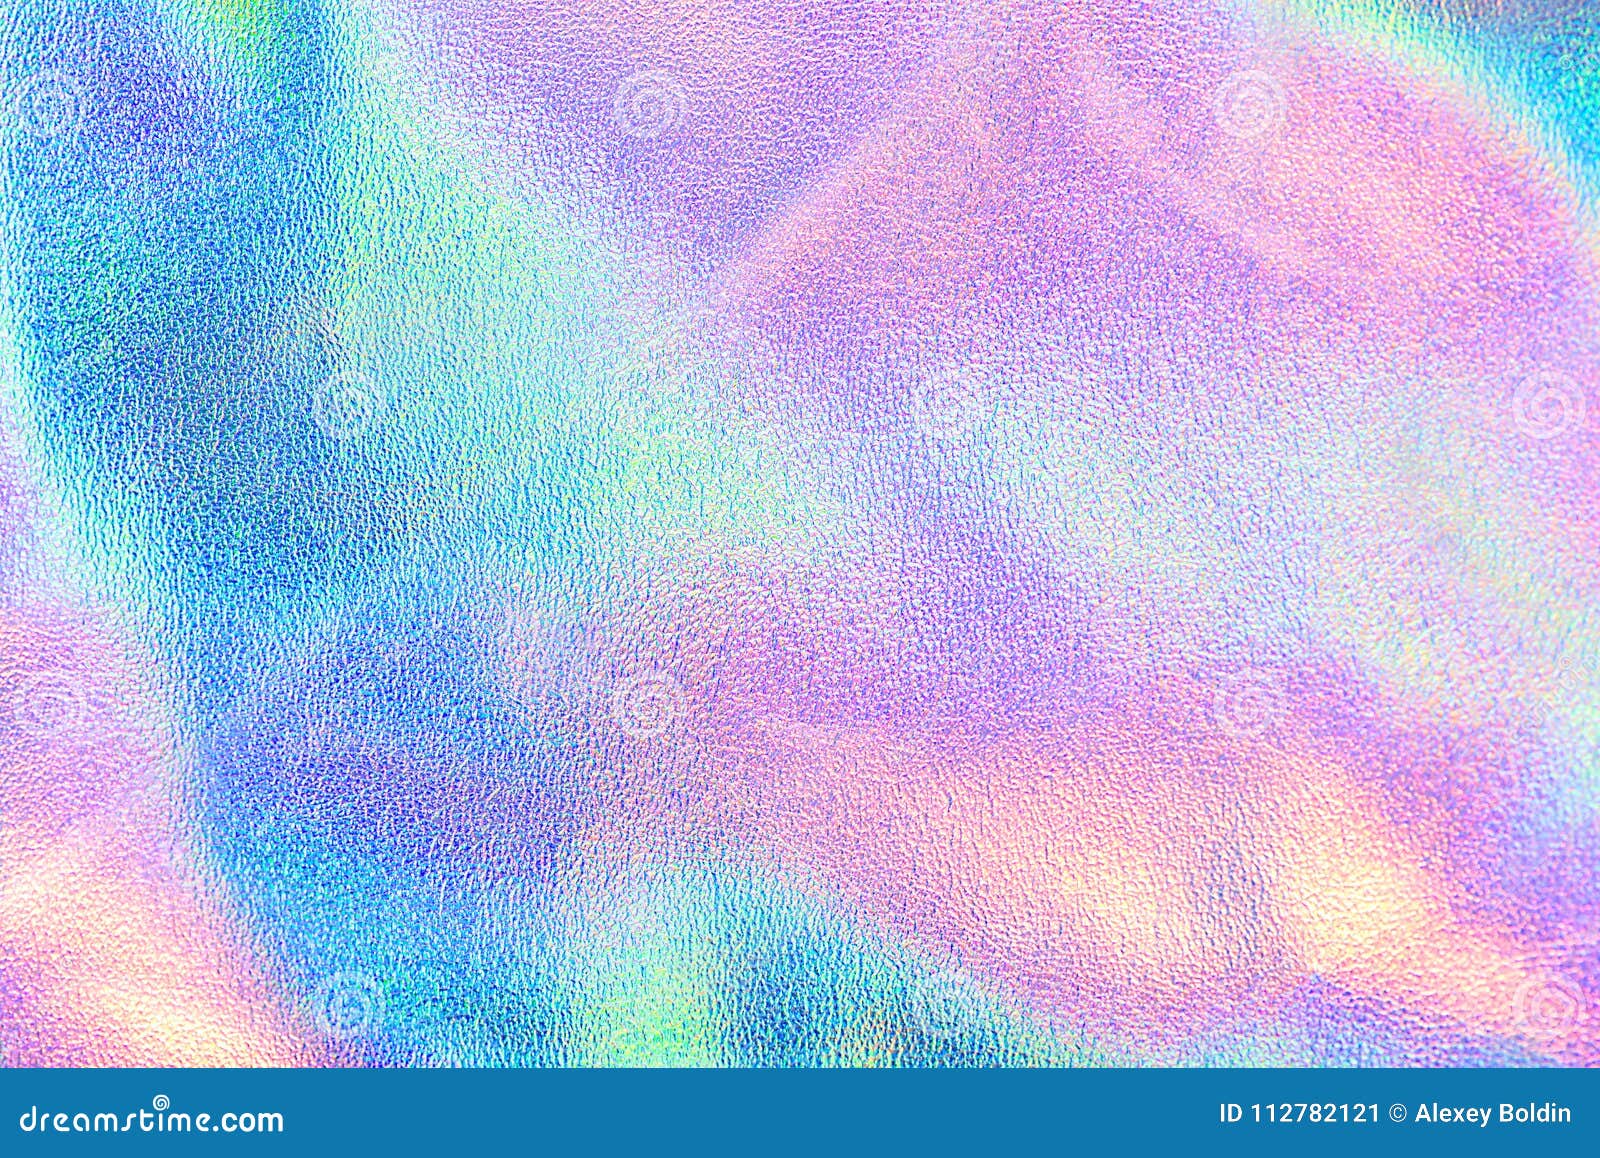 holographic real texture in blue pink green colors with scratches and irregularities